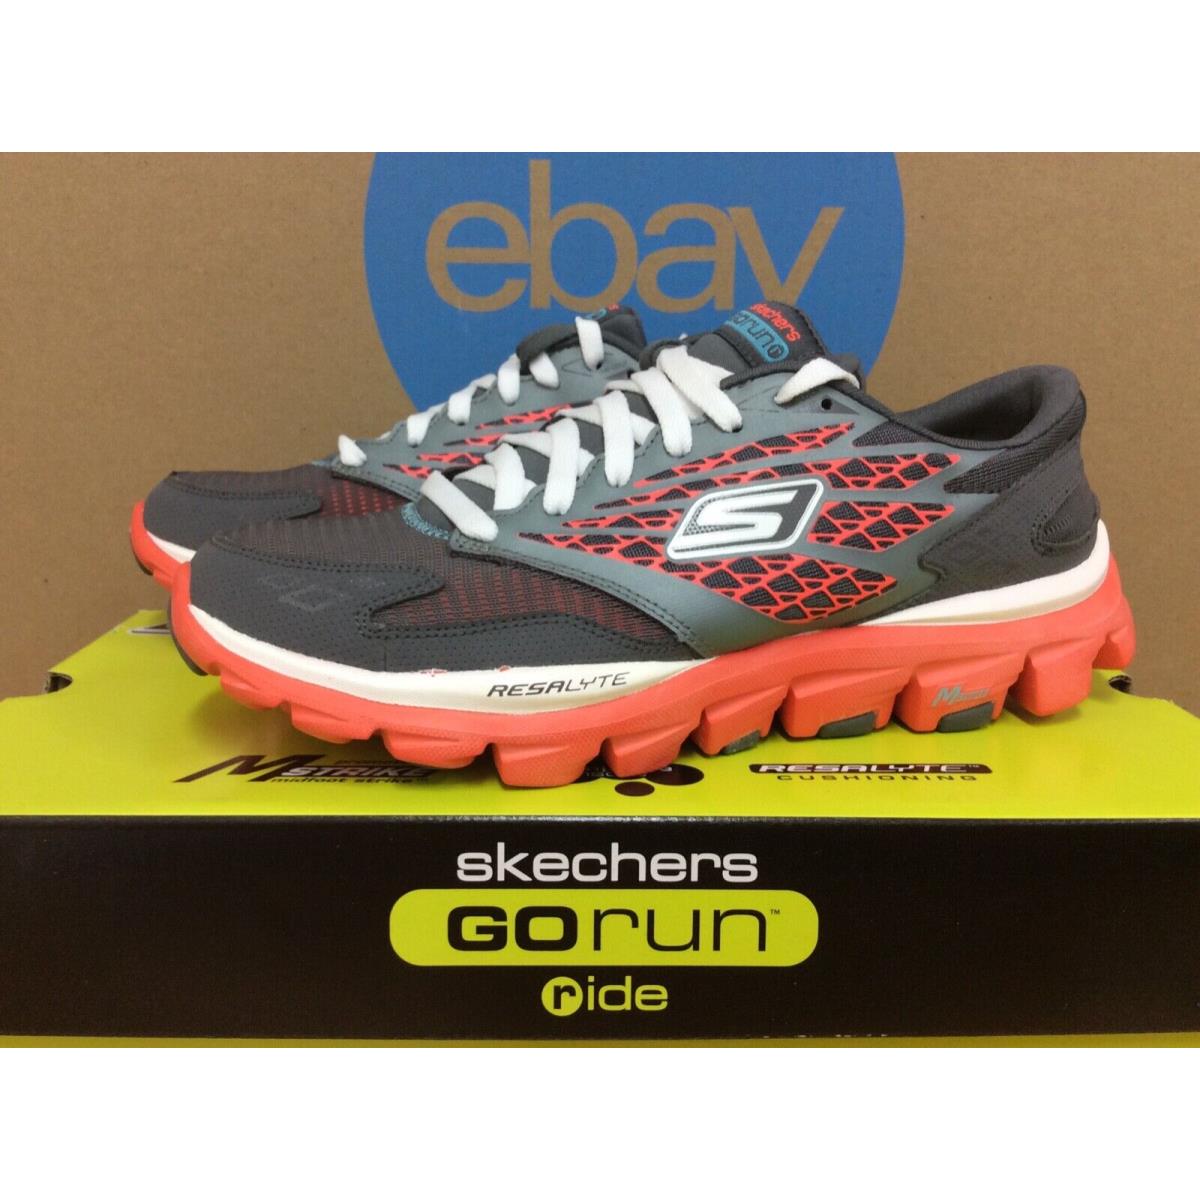 2012 Skechers Go Run Ride Womens Running Shoes Size 5 Charcoal Coral E3